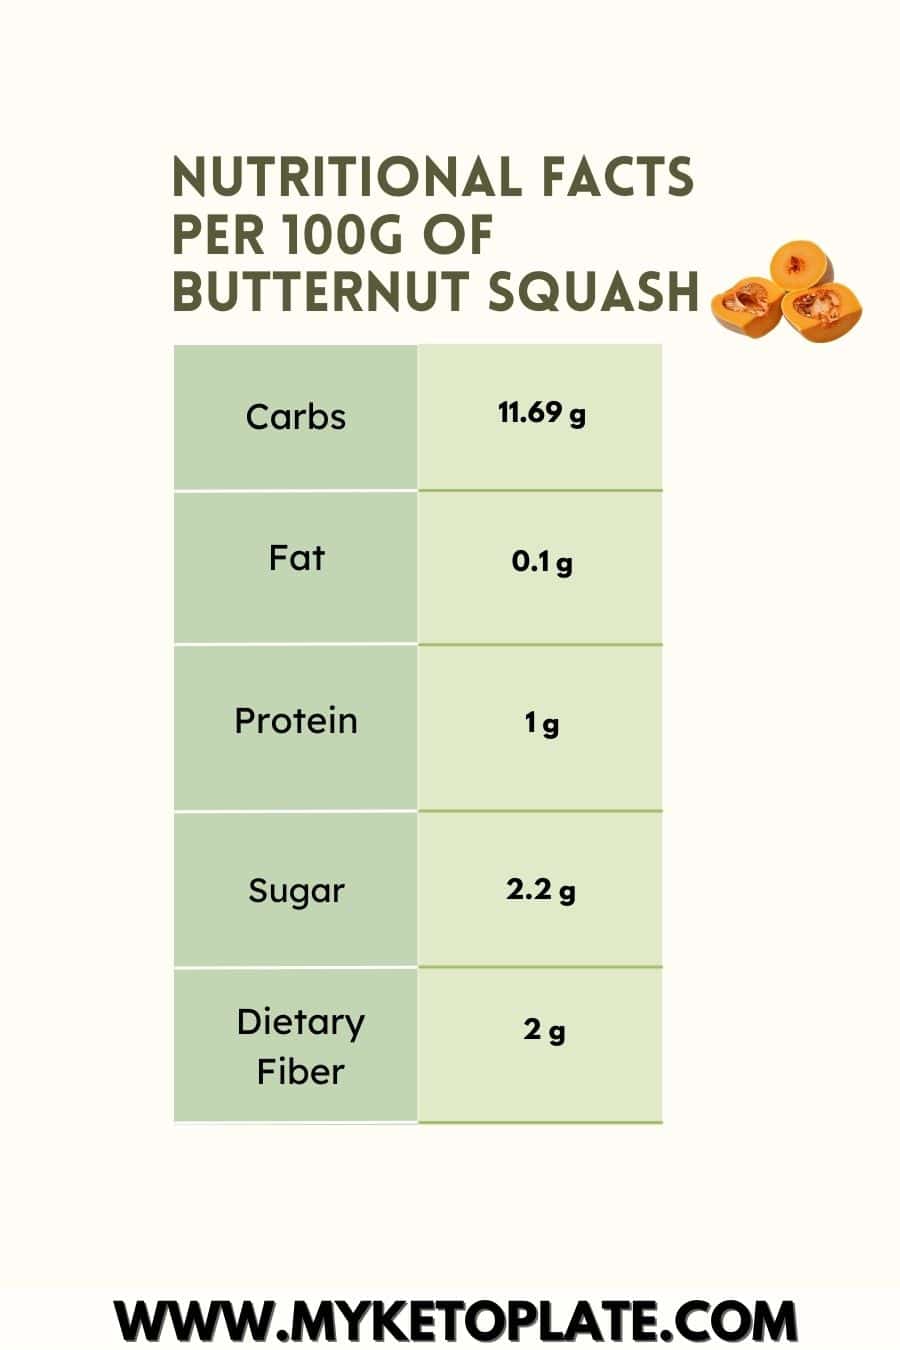 Nutritional Facts per 100g of Butternut Squash